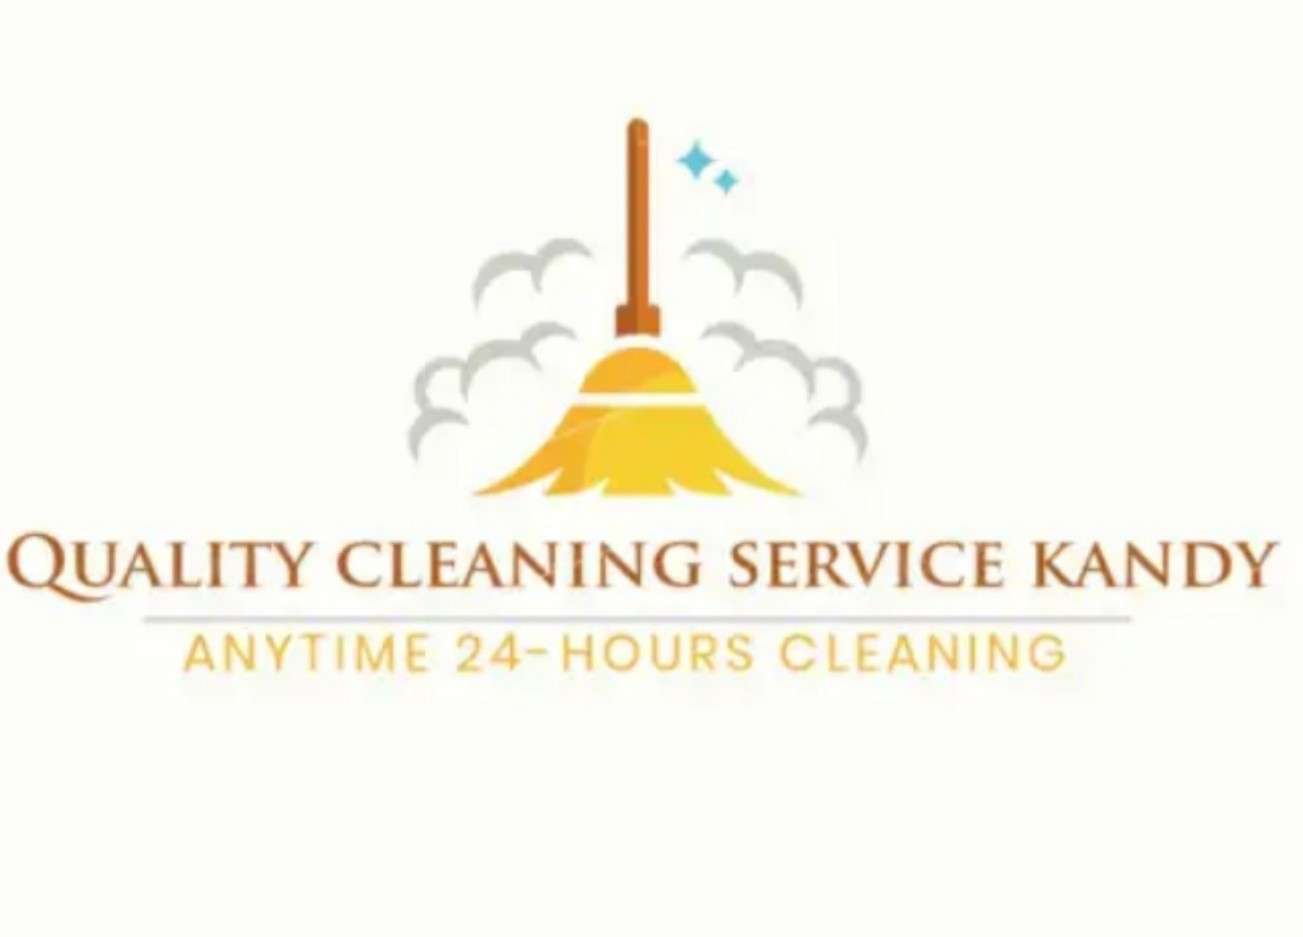 QUALITY CLEANING SERVICE KANDY logo